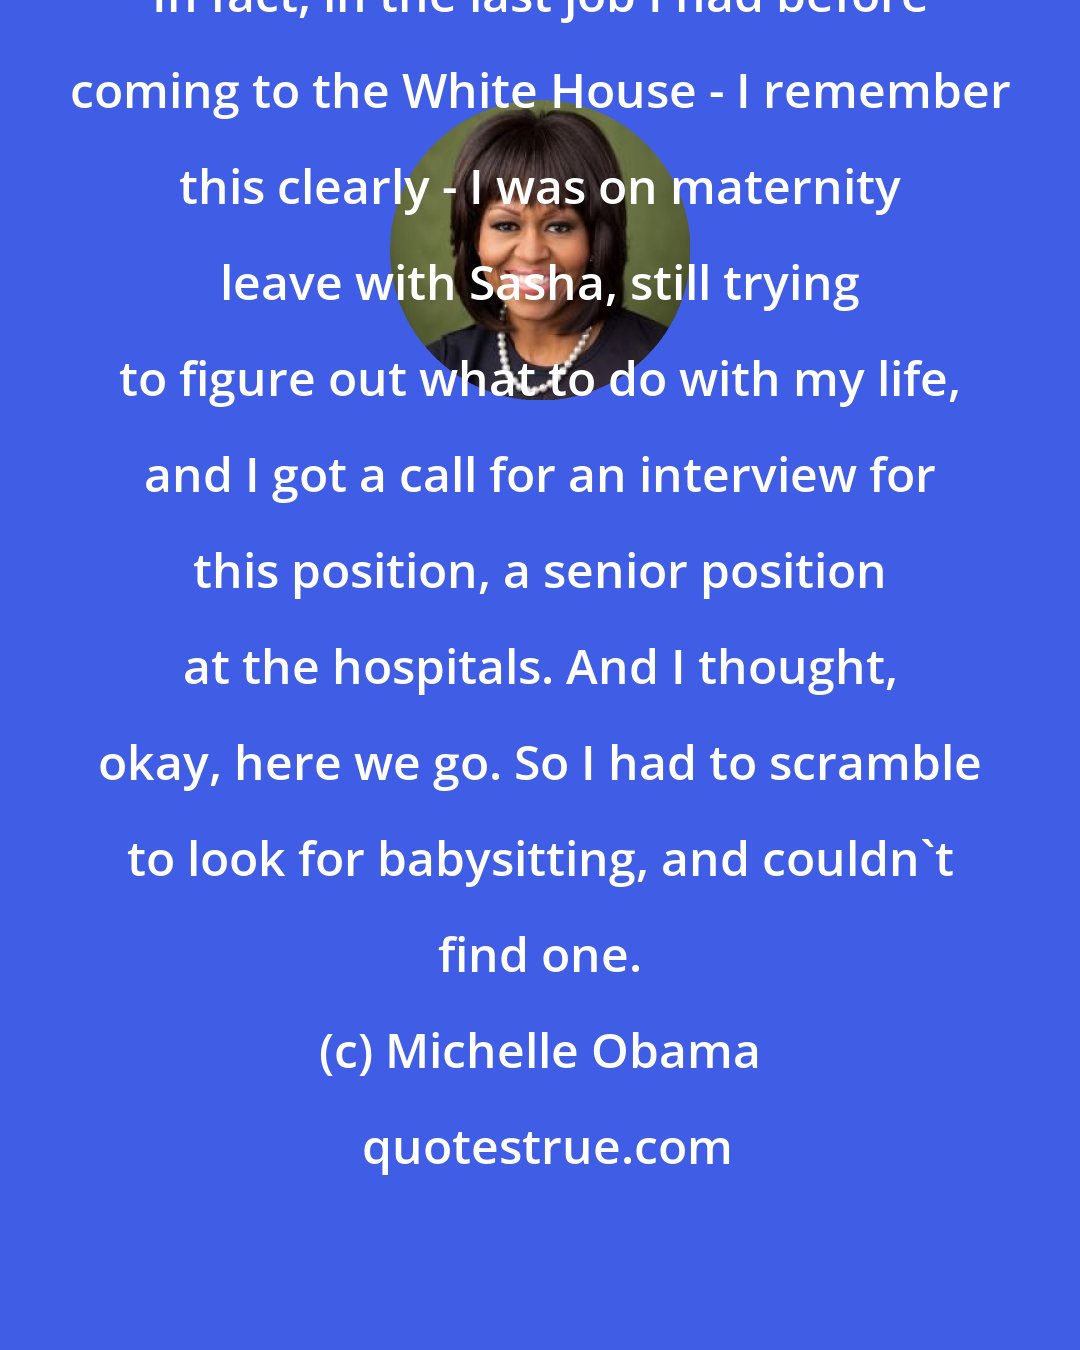 Michelle Obama: In fact, in the last job I had before coming to the White House - I remember this clearly - I was on maternity leave with Sasha, still trying to figure out what to do with my life, and I got a call for an interview for this position, a senior position at the hospitals. And I thought, okay, here we go. So I had to scramble to look for babysitting, and couldn't find one.